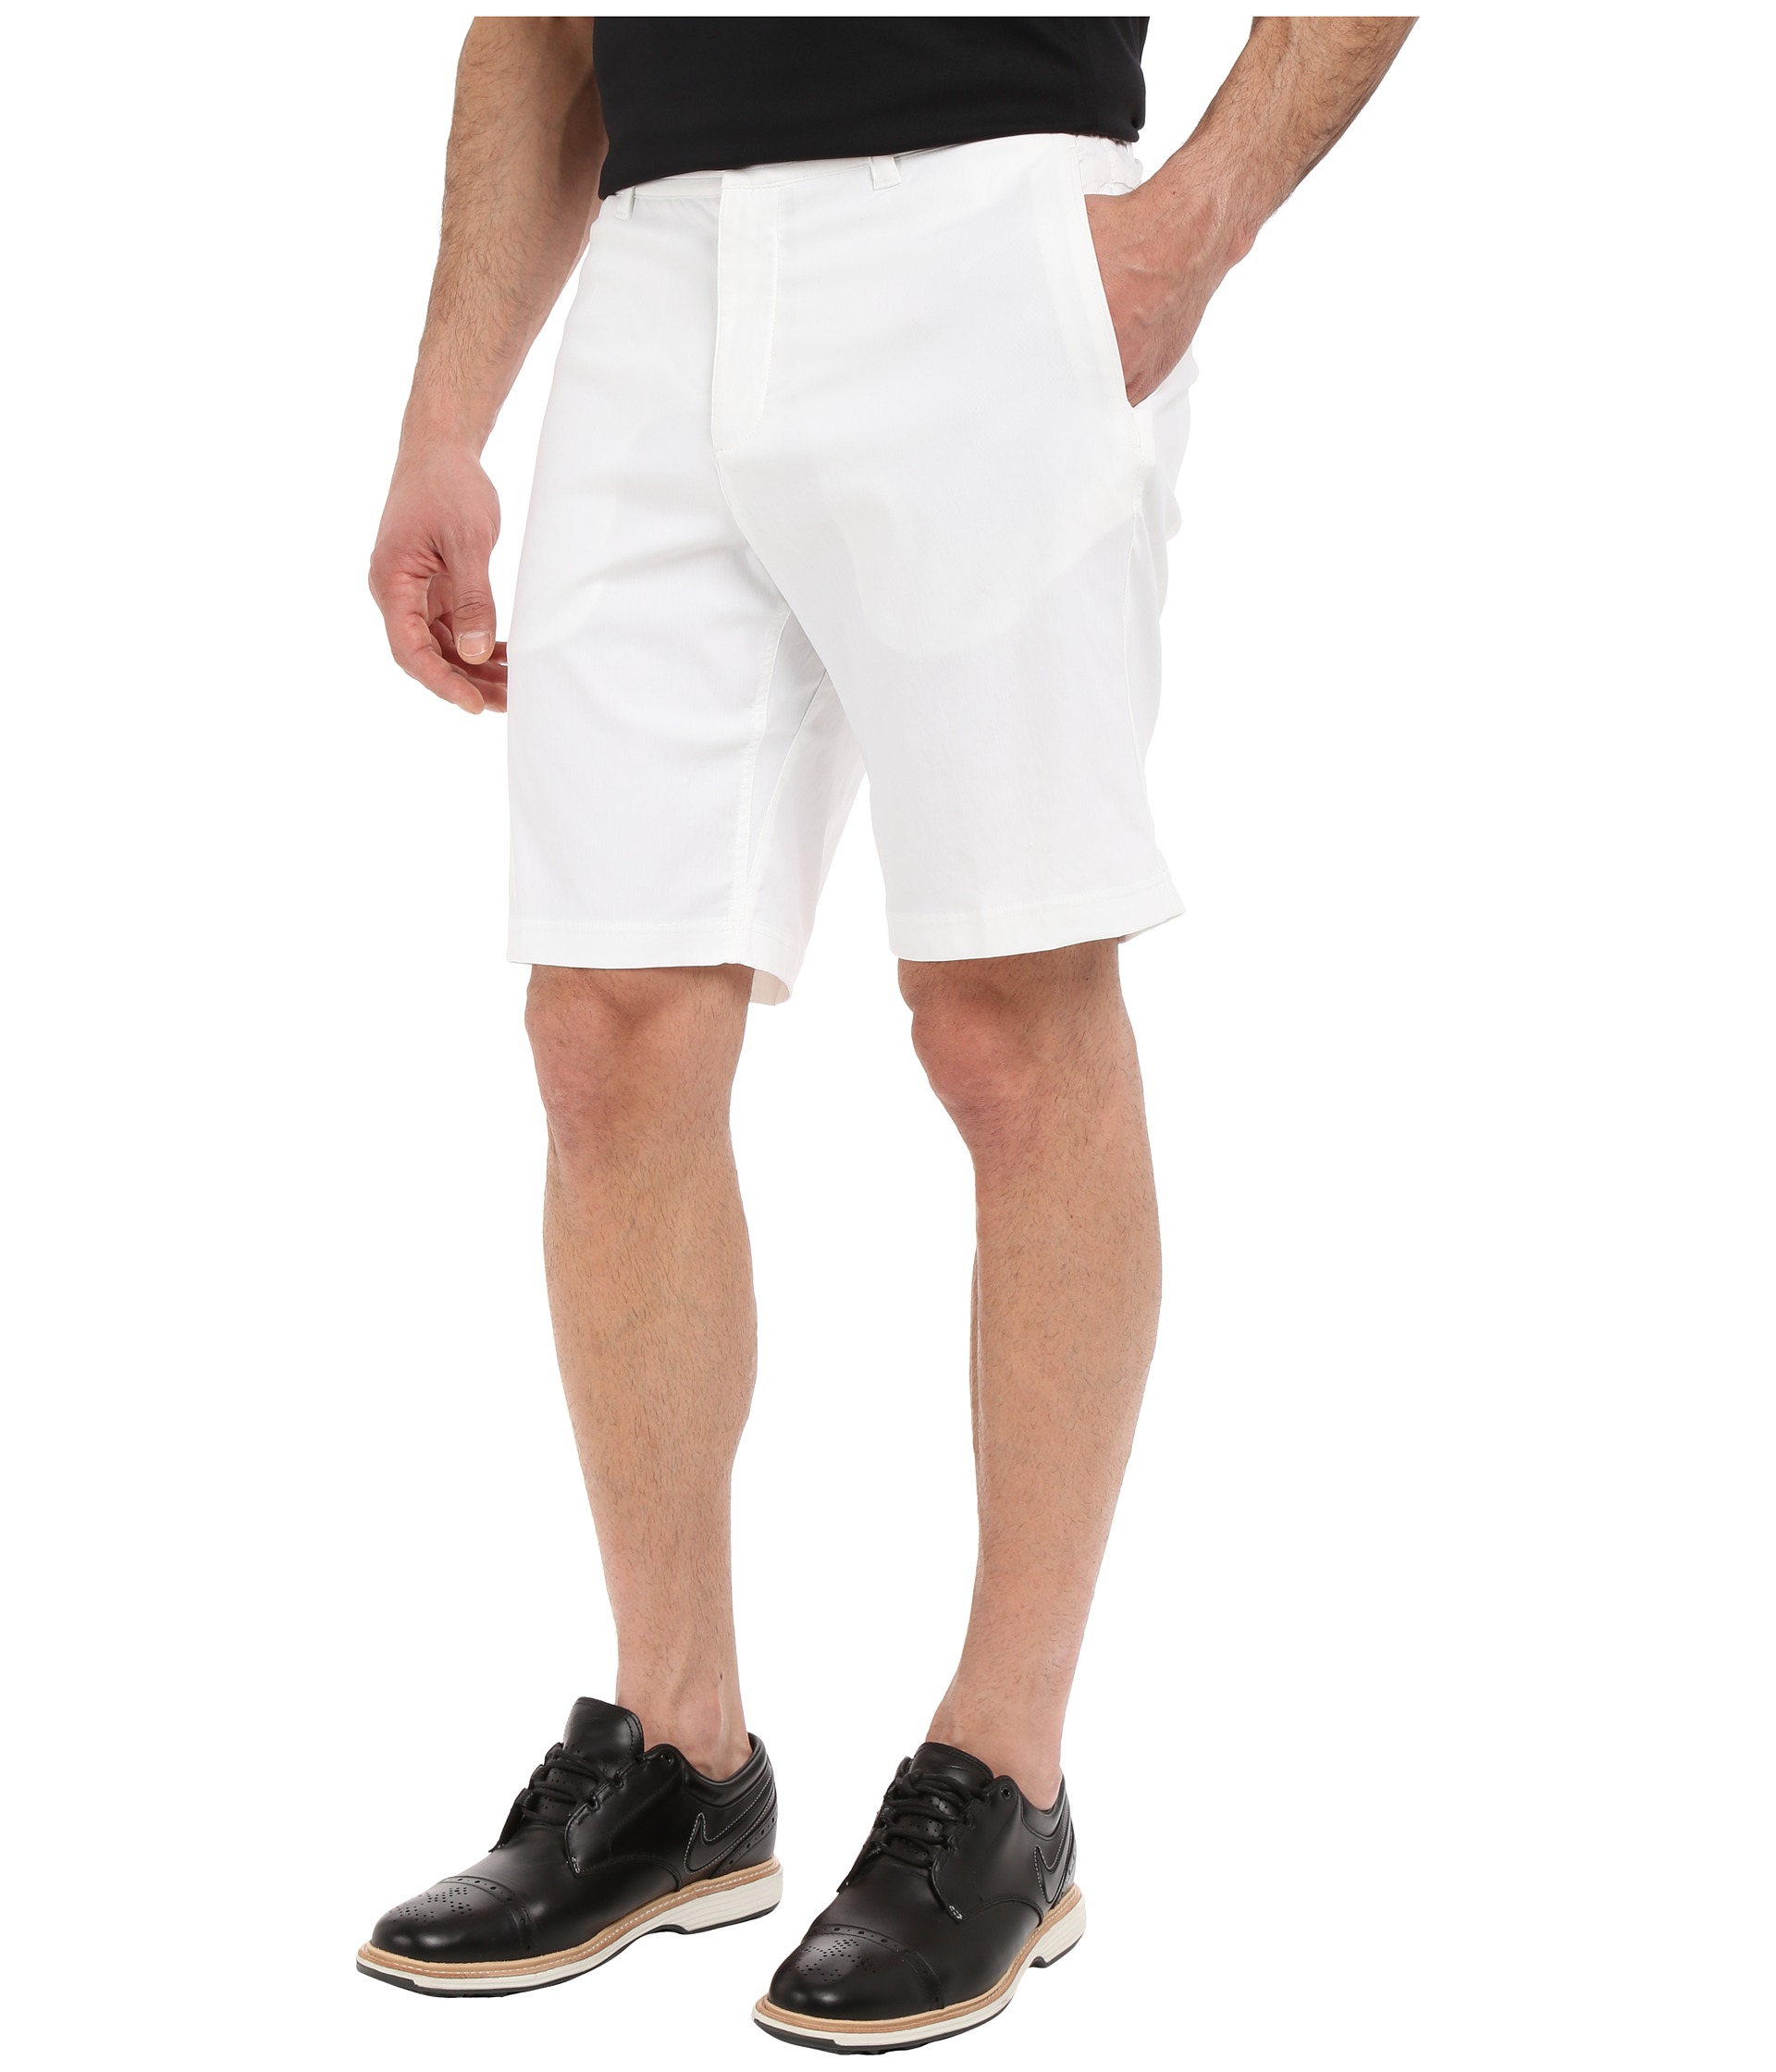 Nike Golf Tiger Woods Practice Shorts 2.0 at Zappos.com